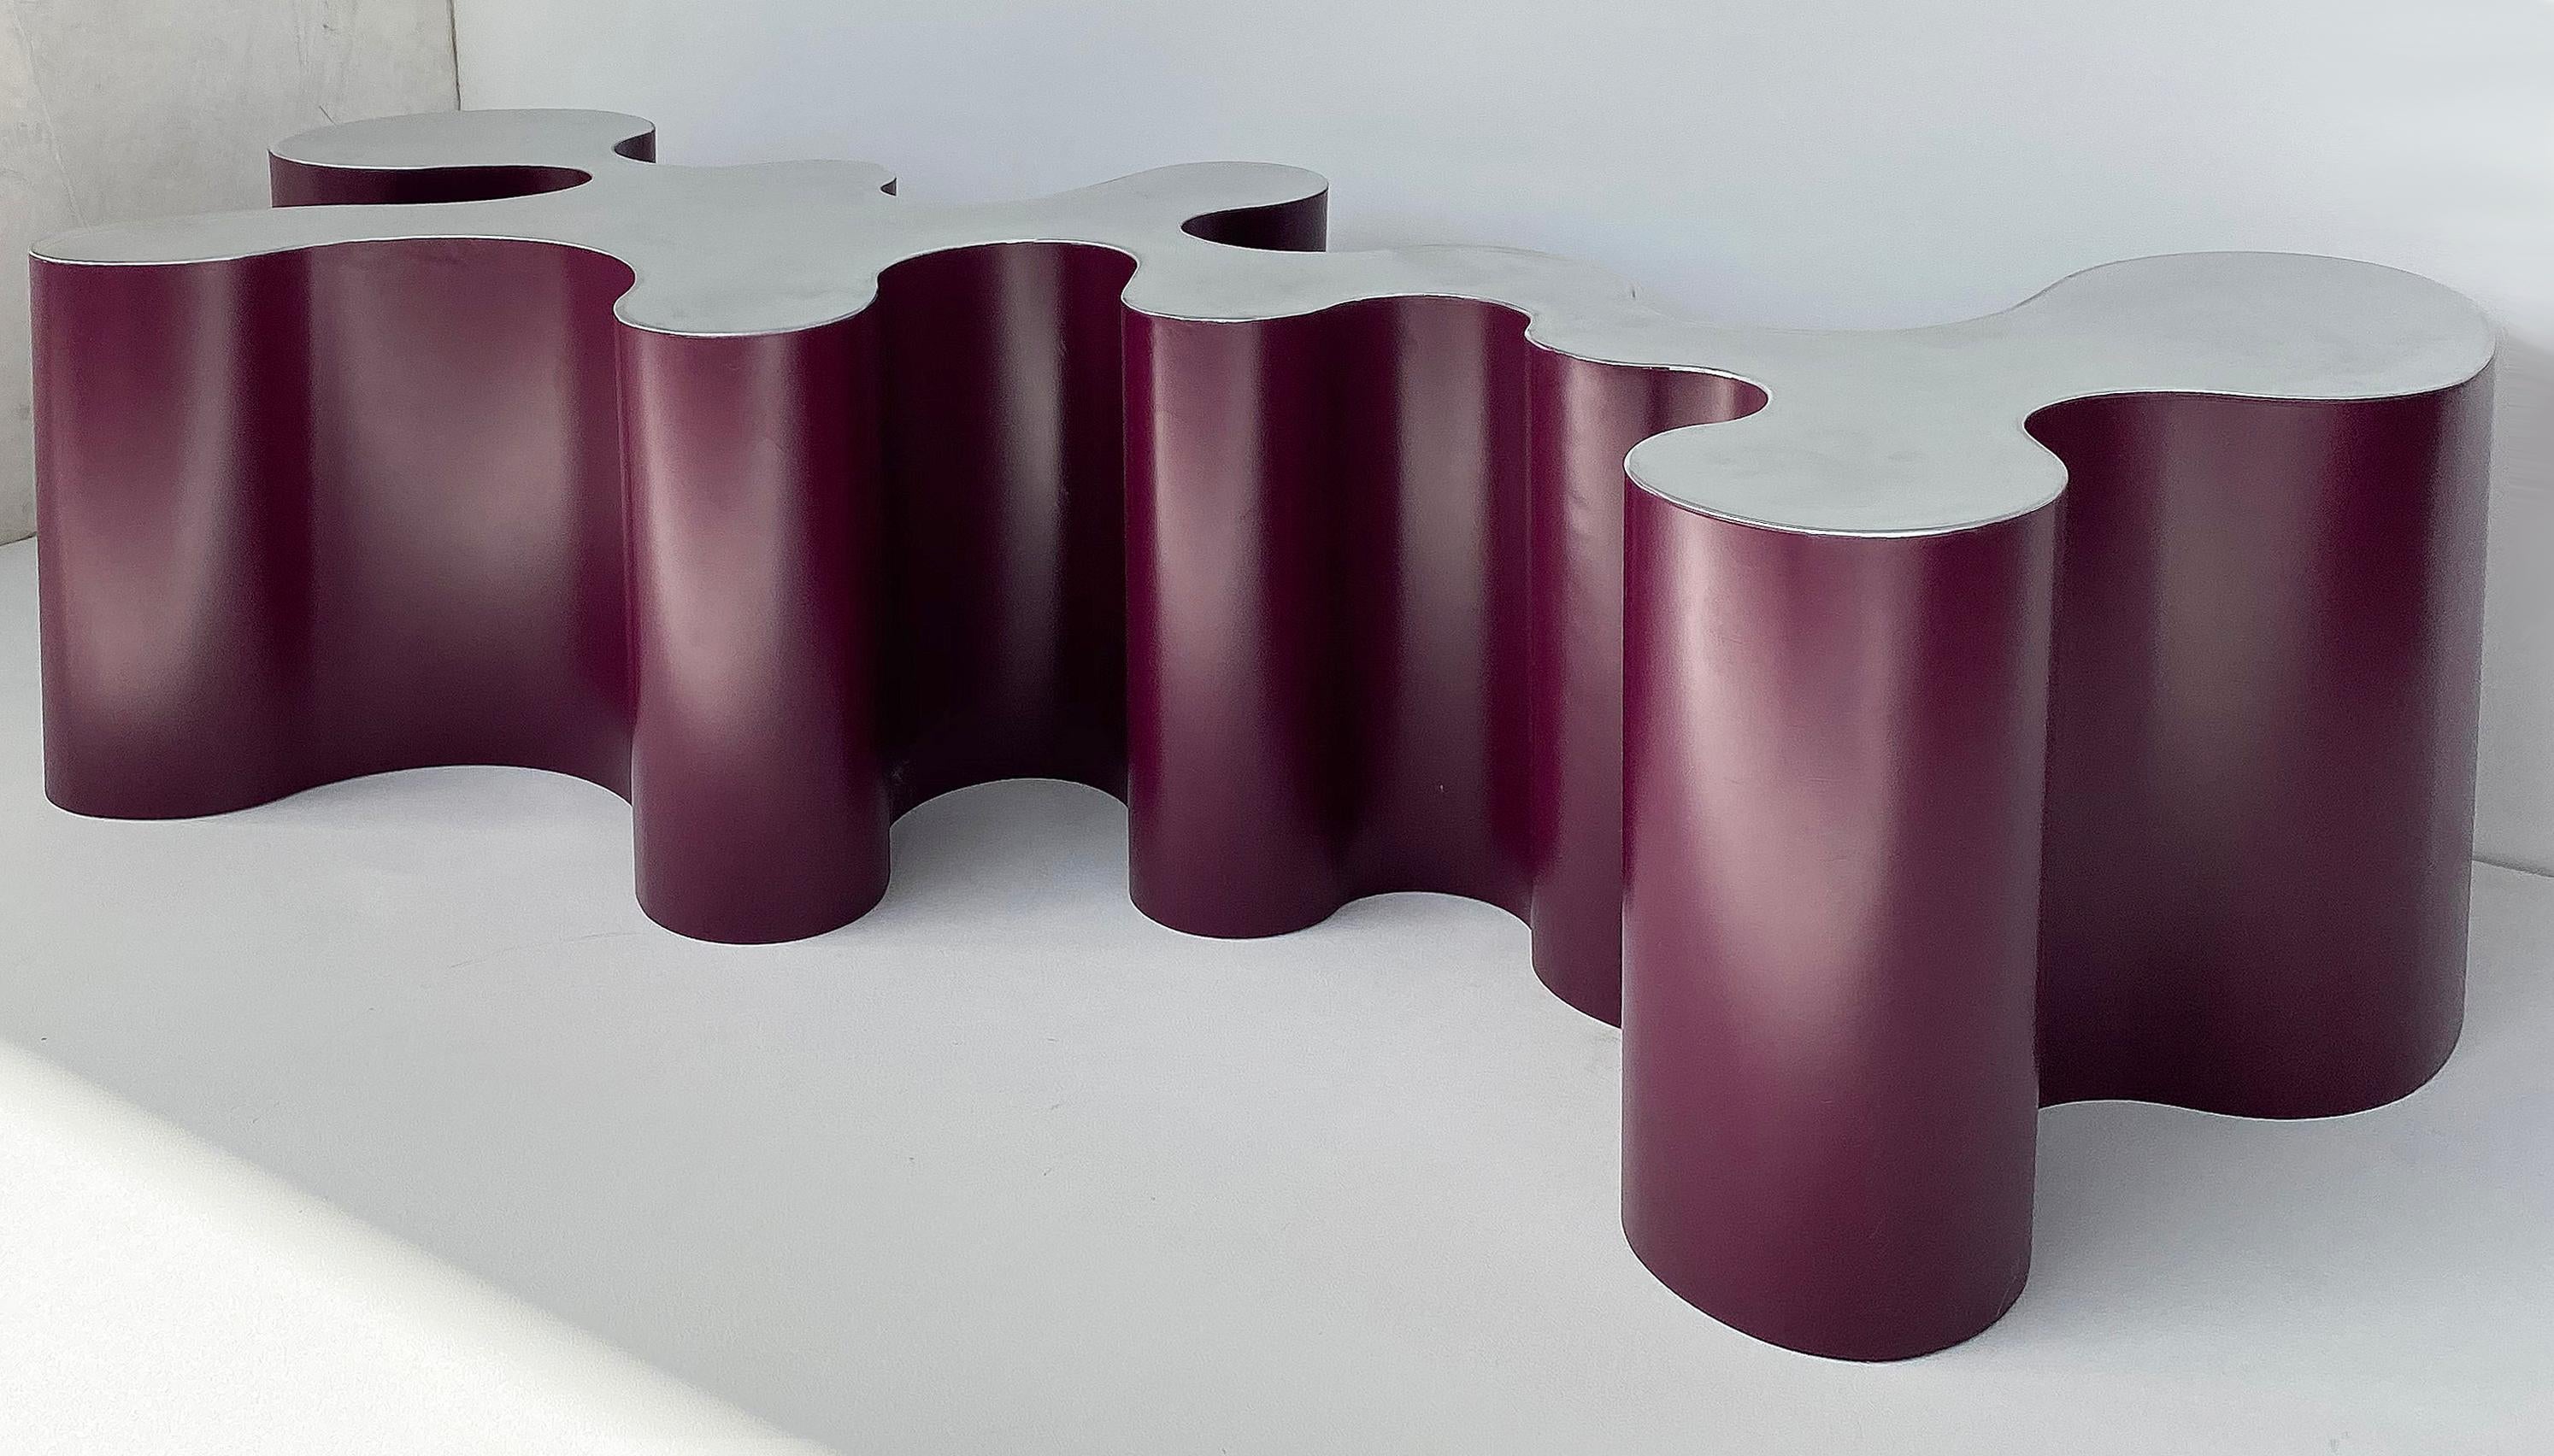 Bert Furnari sculptural aluminum coffee table base with plum enameled sides

Offered for sale is a Bert Furnari sculptural aluminum coffee table base with plum enameled sides. This very sculptural and unique coffee table can be used with a glass top